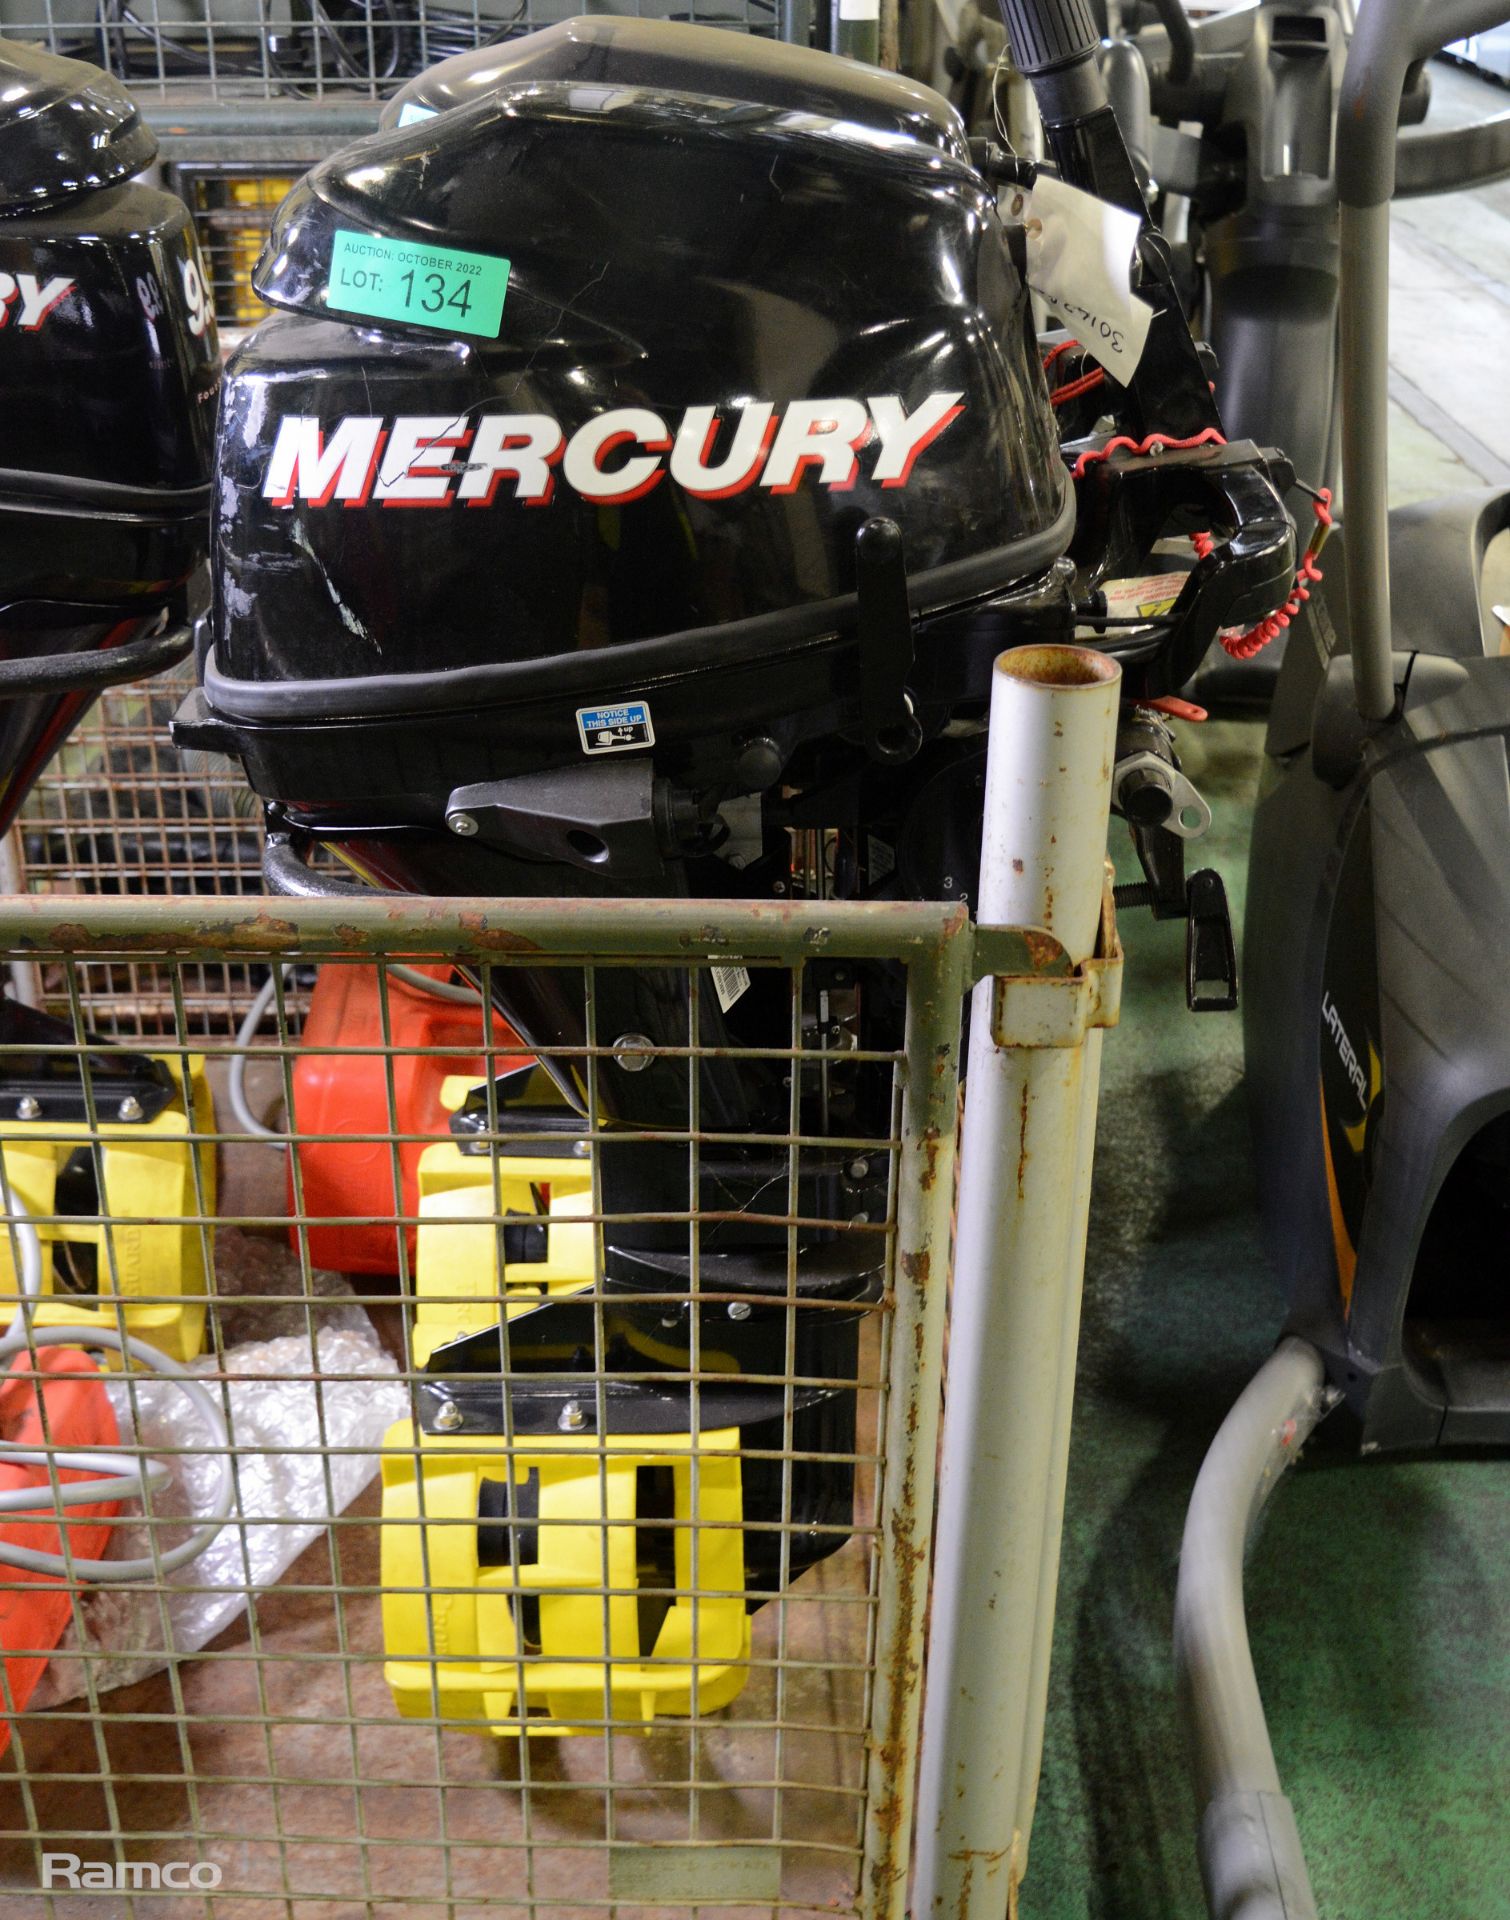 Mercury 9.9 HP four stroke outboard motor & fuel can - 45.8 Hours